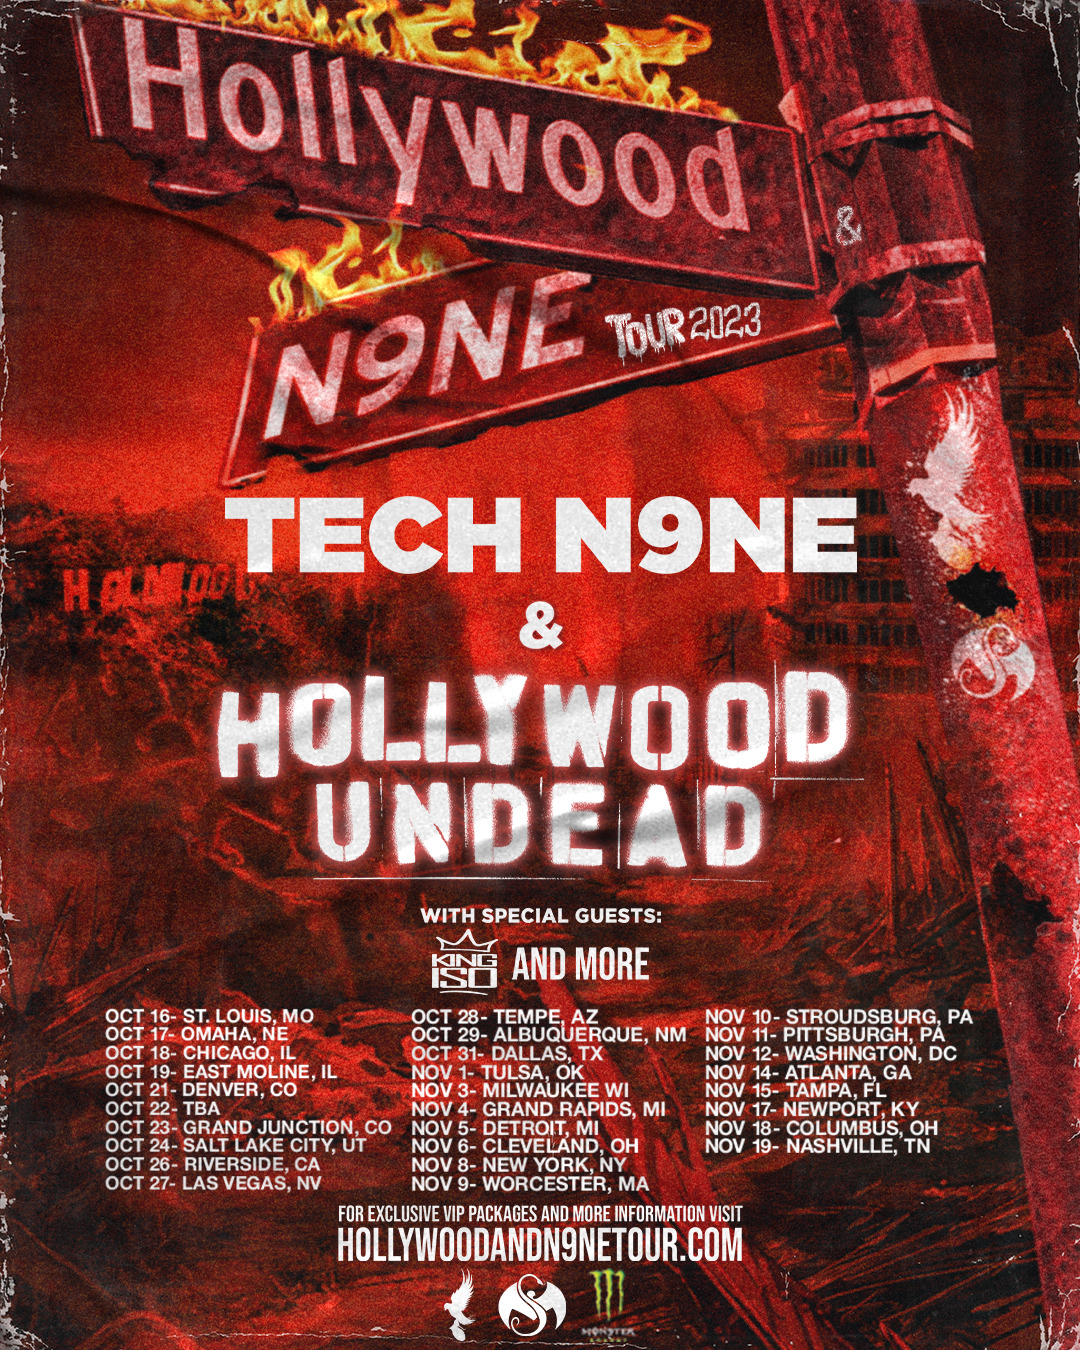 HOLLYWOOD UNDEAD The wait is FINALLY over! All About The Rock